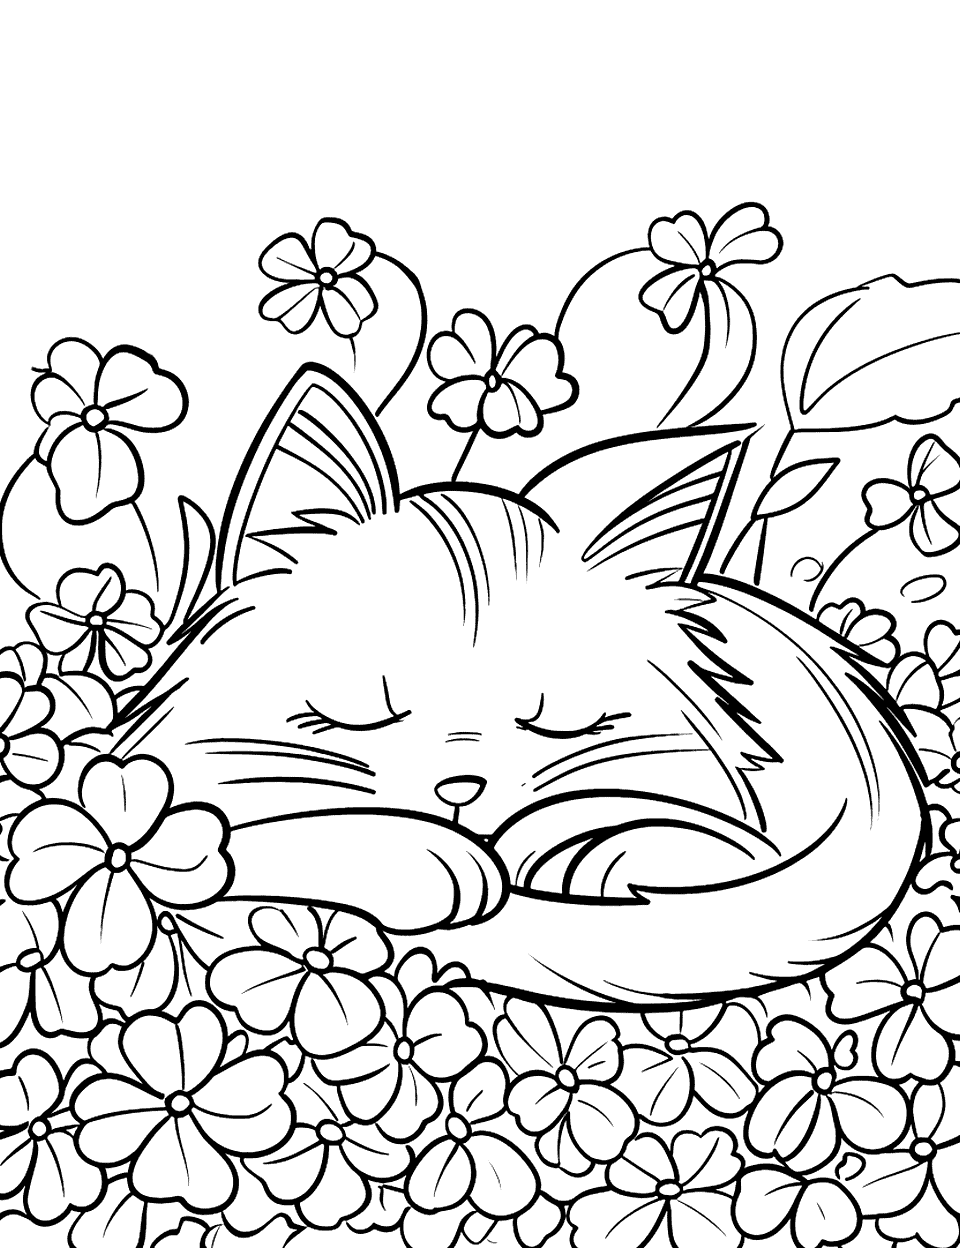 A Cat Napping in Shamrock Patch Coloring Page - A content cat curled up asleep among a dense patch of shamrocks.